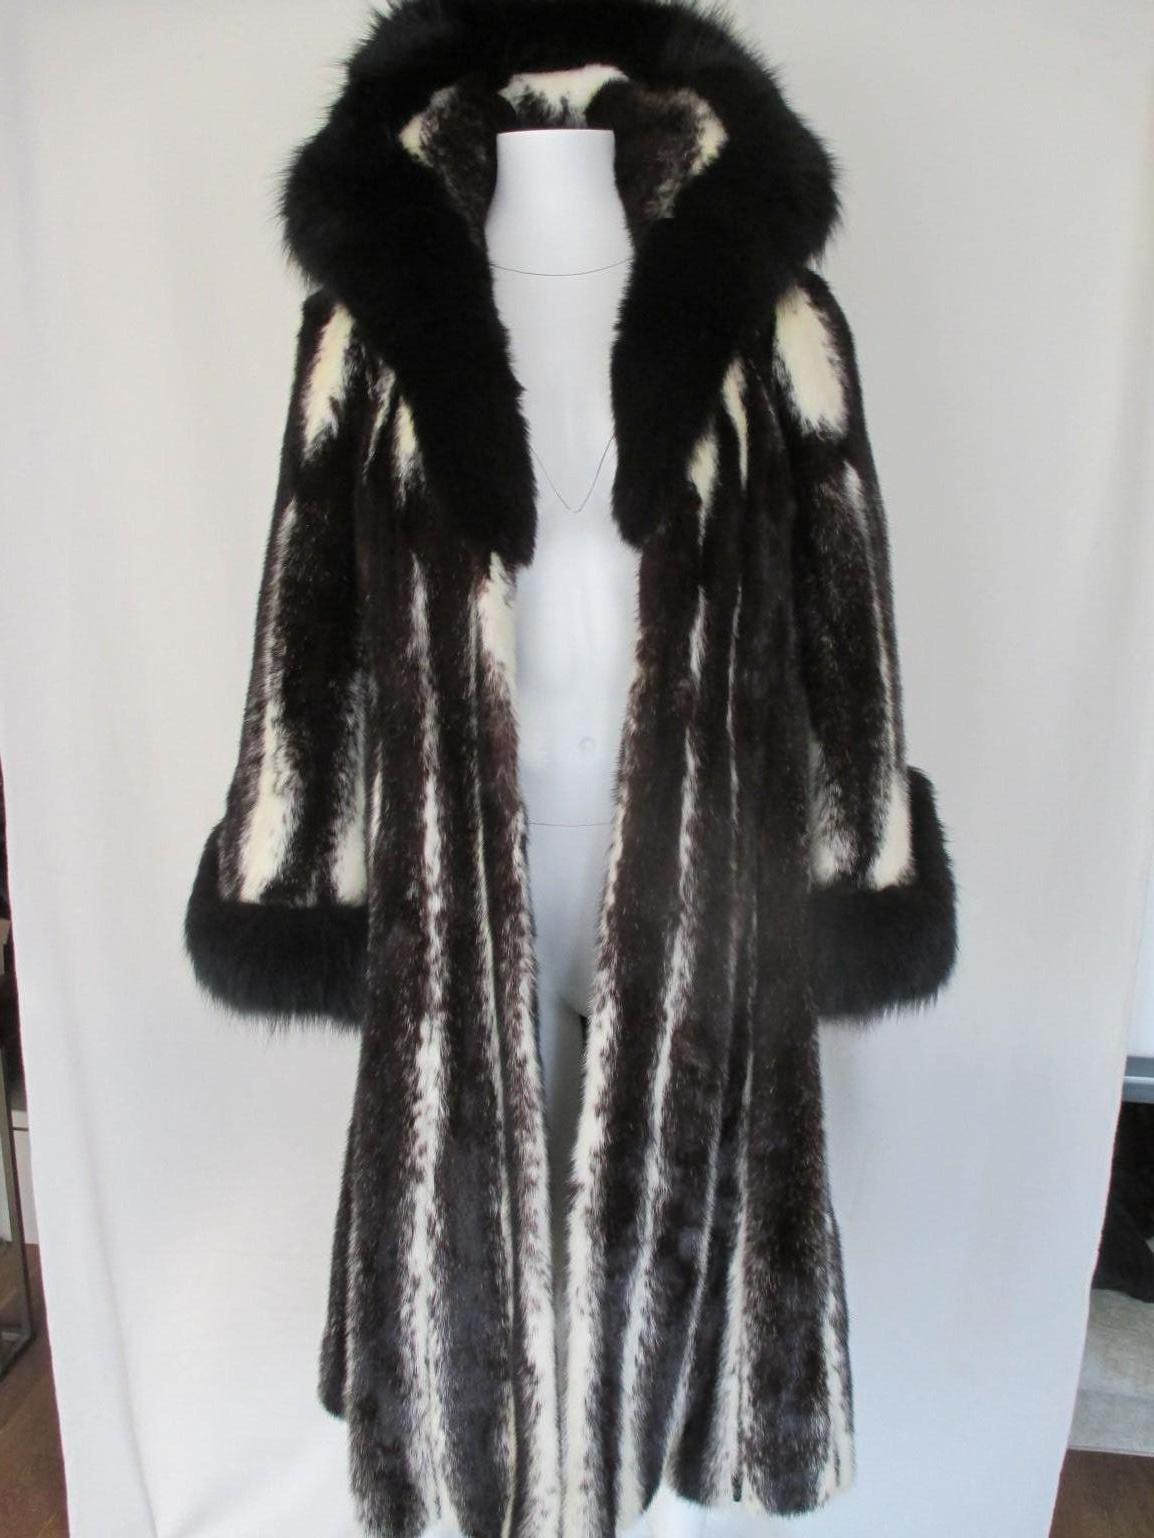 This exclusive coat is made from soft quality cross mink / kohinoor fur, Saga Nerz,  trimmed with black fox at the collar and sleeves and a huge collar.
It has 2 velvet pockets and 4 closing hooks.
The sleeves are flared.
In good pre- owned